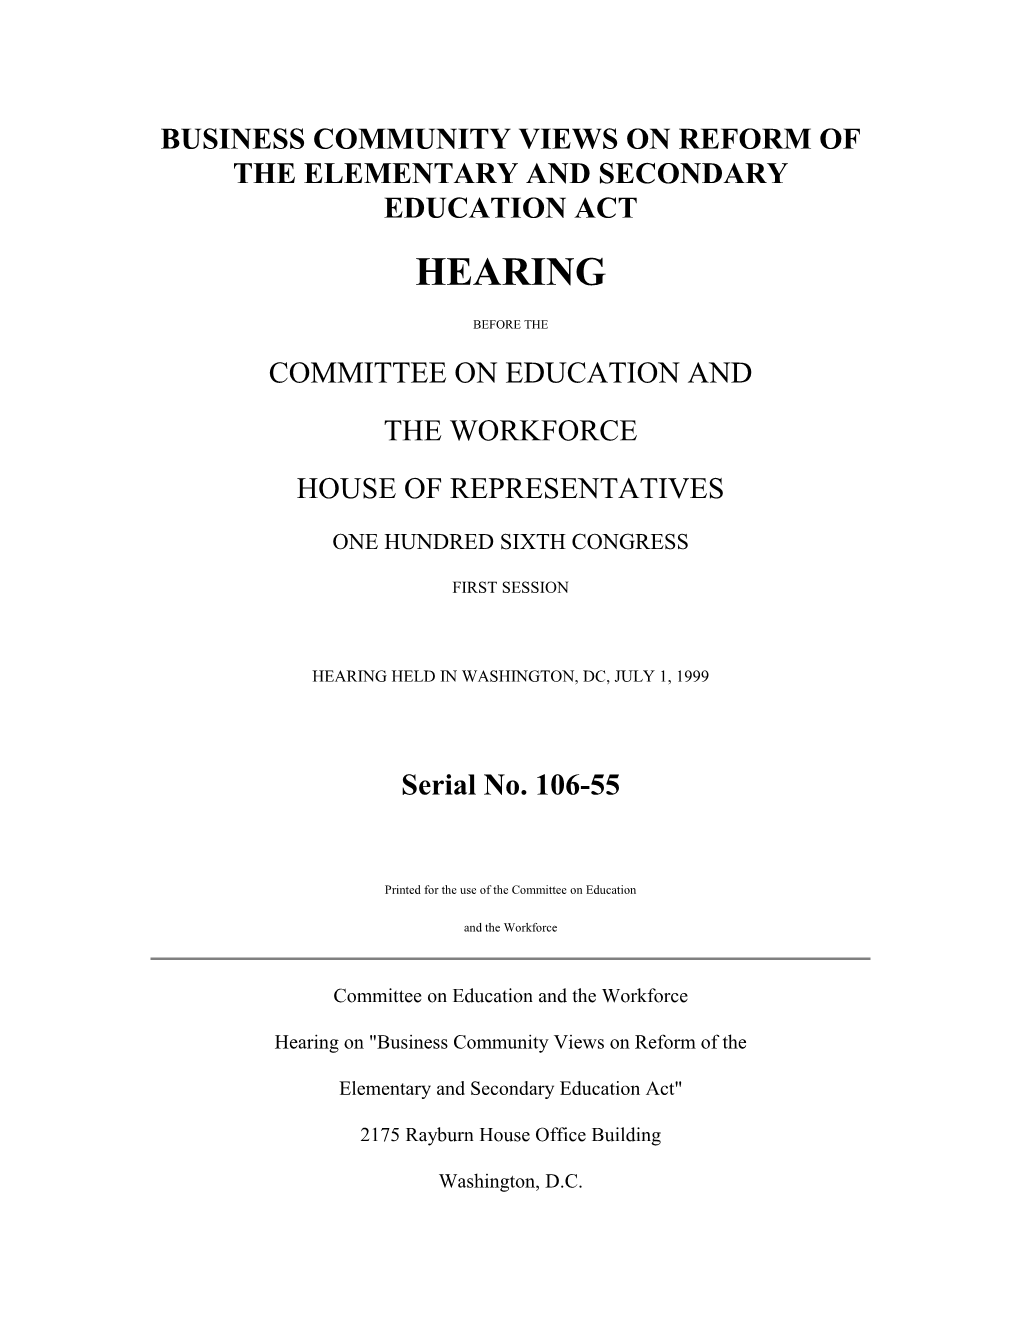 Business Community Views on Reform of the Elementary and Secondary Education Act: Hearing